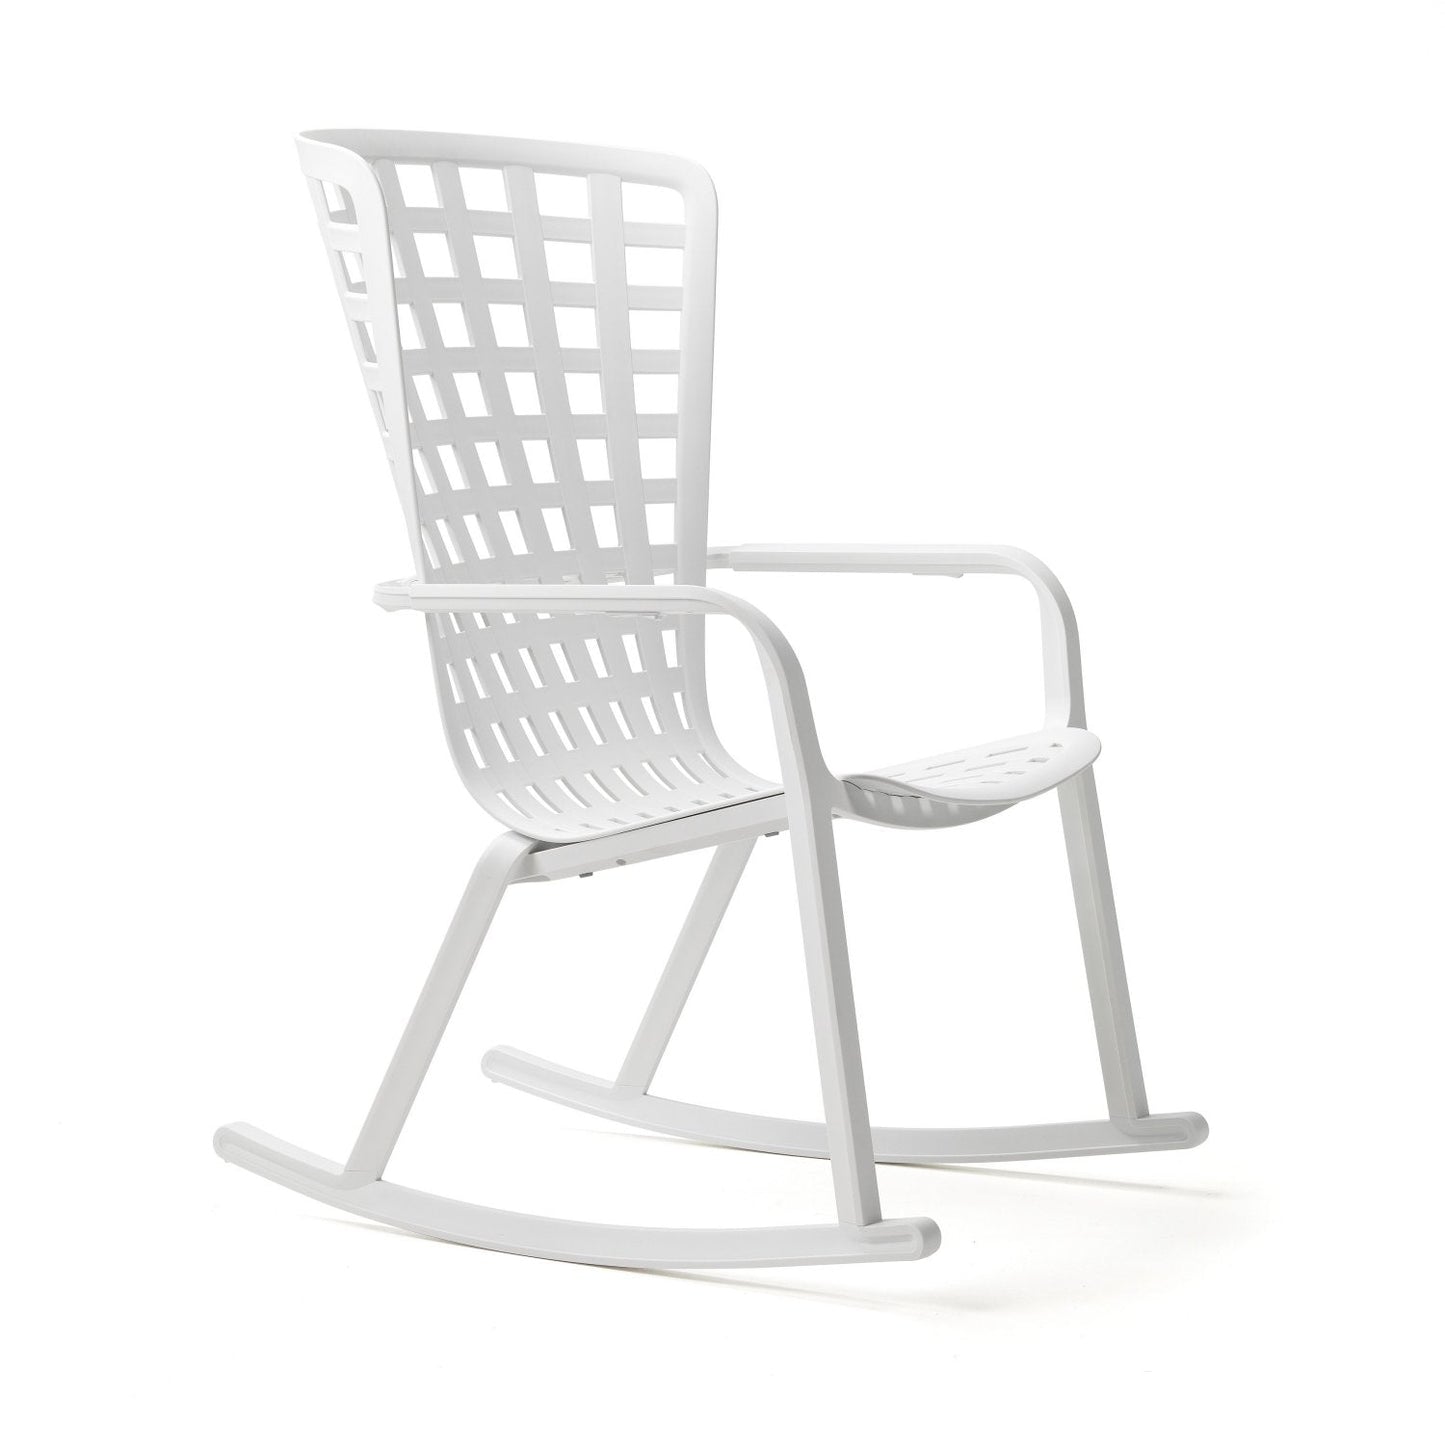 Folio Outdoor Rocking Chair - with cushions